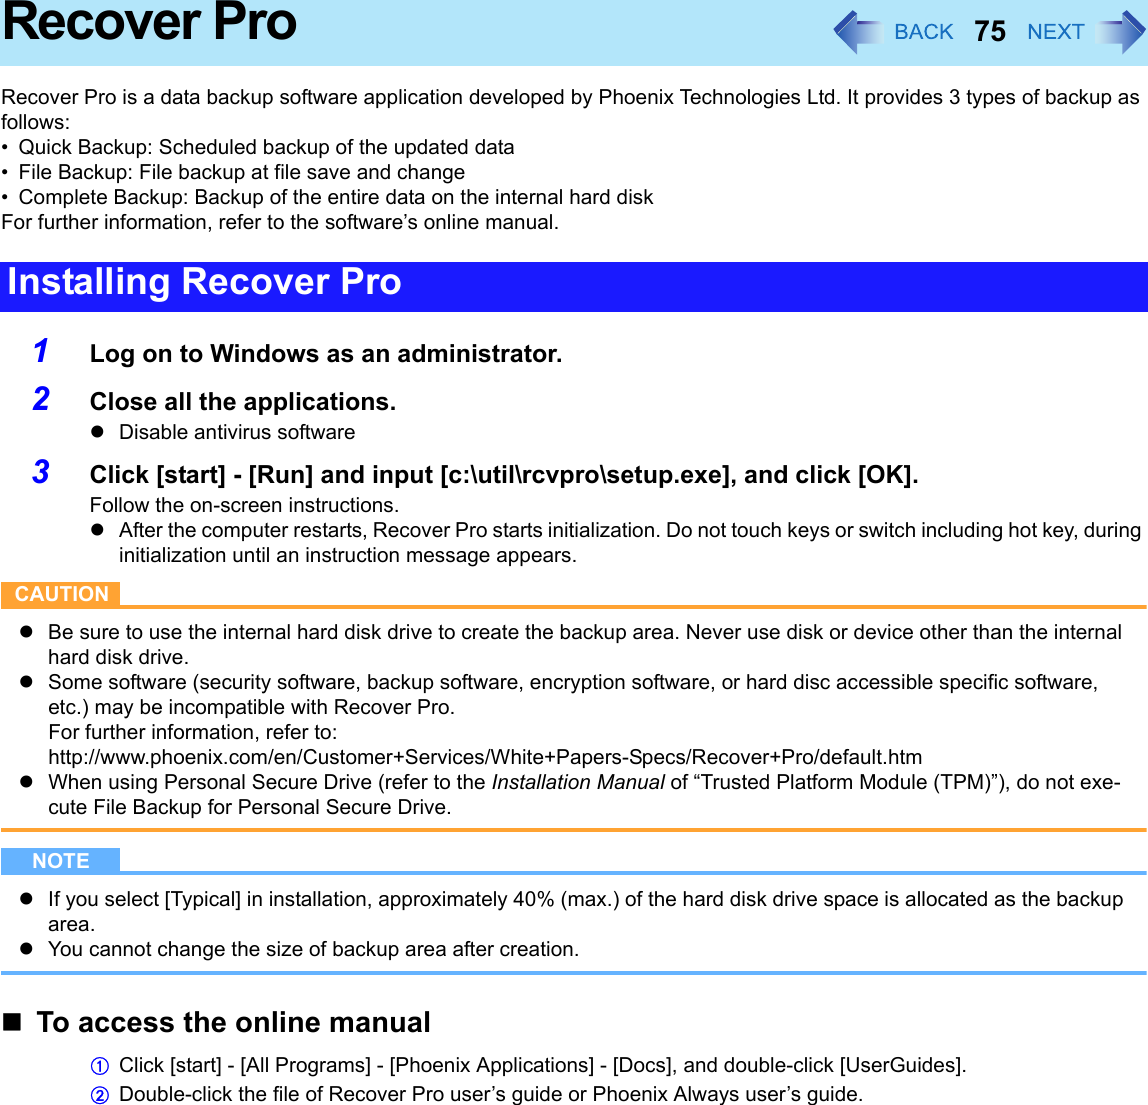 75Recover ProRecover Pro is a data backup software application developed by Phoenix Technologies Ltd. It provides 3 types of backup as follows:• Quick Backup: Scheduled backup of the updated data• File Backup: File backup at file save and change• Complete Backup: Backup of the entire data on the internal hard diskFor further information, refer to the software’s online manual.1Log on to Windows as an administrator.2Close all the applications.zDisable antivirus software3Click [start] - [Run] and input [c:\util\rcvpro\setup.exe], and click [OK].Follow the on-screen instructions.zAfter the computer restarts, Recover Pro starts initialization. Do not touch keys or switch including hot key, during initialization until an instruction message appears.CAUTIONzBe sure to use the internal hard disk drive to create the backup area. Never use disk or device other than the internal hard disk drive.zSome software (security software, backup software, encryption software, or hard disc accessible specific software, etc.) may be incompatible with Recover Pro.For further information, refer to:http://www.phoenix.com/en/Customer+Services/White+Papers-Specs/Recover+Pro/default.htmzWhen using Personal Secure Drive (refer to the Installation Manual of “Trusted Platform Module (TPM)”), do not exe-cute File Backup for Personal Secure Drive.NOTEzIf you select [Typical] in installation, approximately 40% (max.) of the hard disk drive space is allocated as the backup area.zYou cannot change the size of backup area after creation.To access the online manualAClick [start] - [All Programs] - [Phoenix Applications] - [Docs], and double-click [UserGuides].BDouble-click the file of Recover Pro user’s guide or Phoenix Always user’s guide.Installing Recover Pro